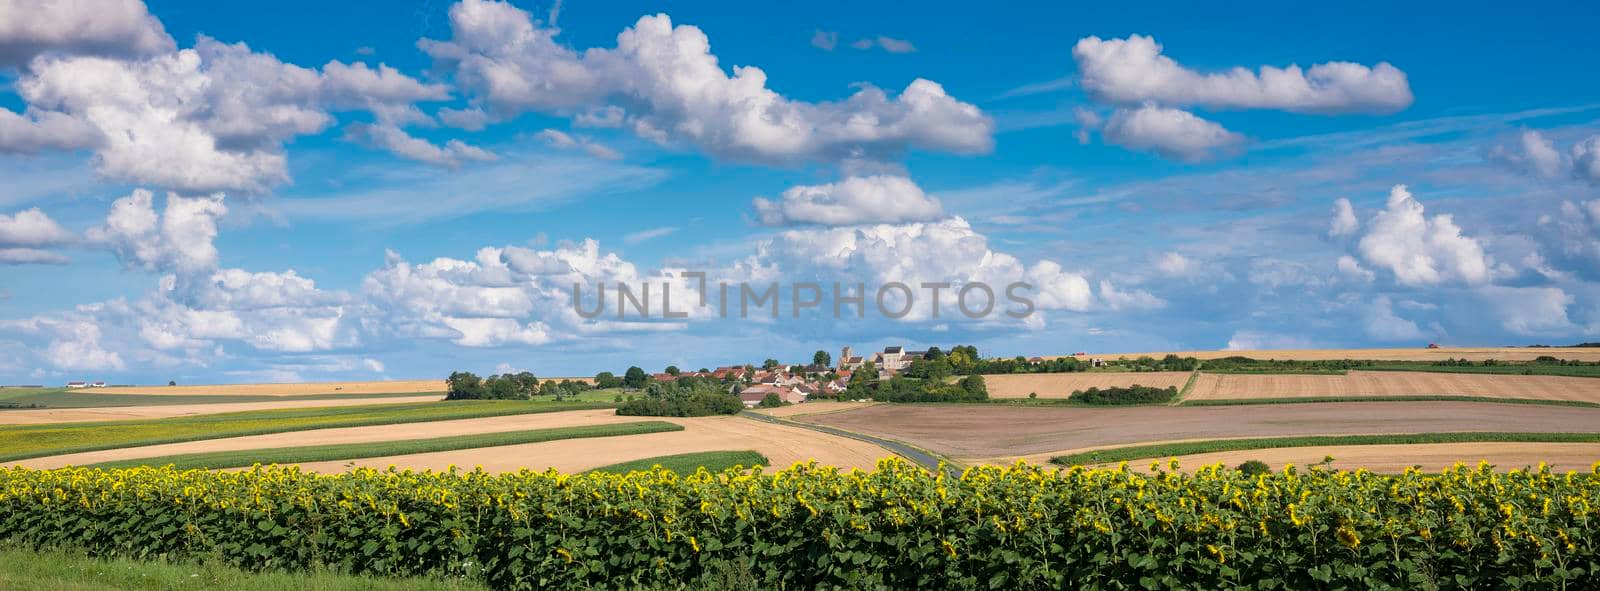 sunflowers, villages and rolling hills in french countryside south of reims under blue sky in summer